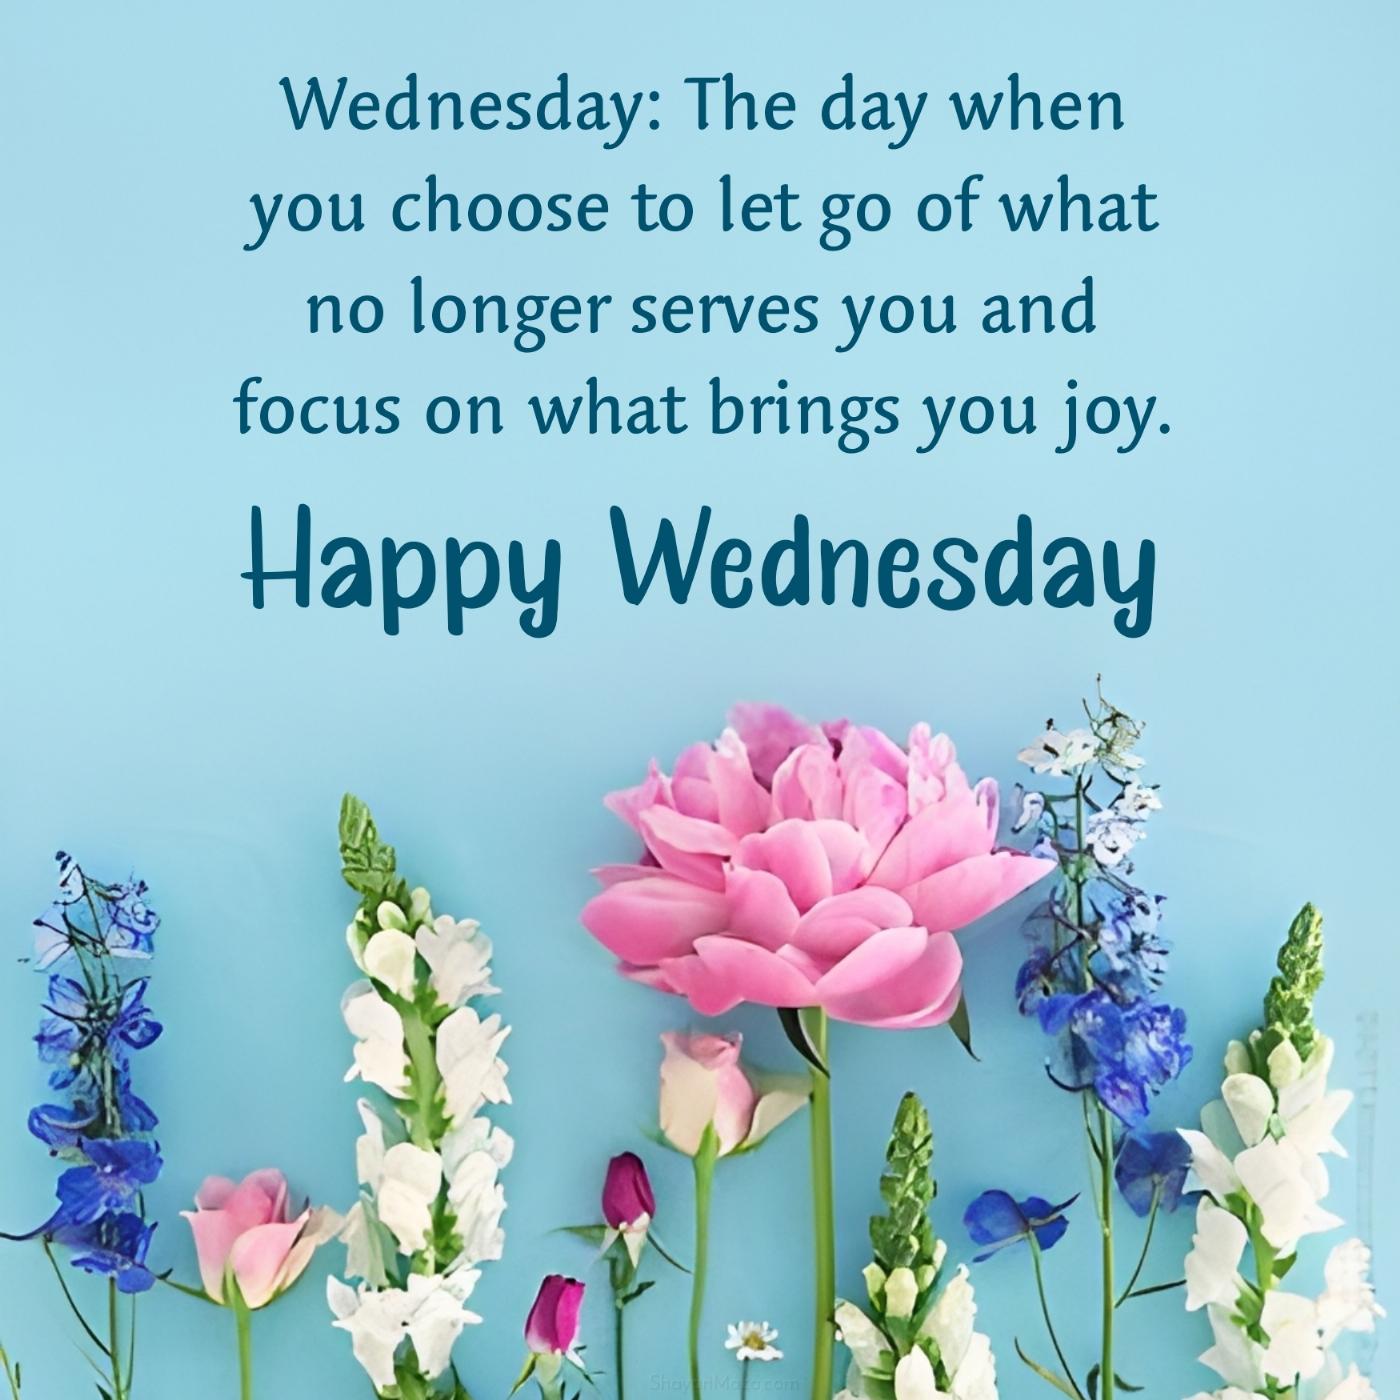 Wednesday: The day when you choose to let go of what